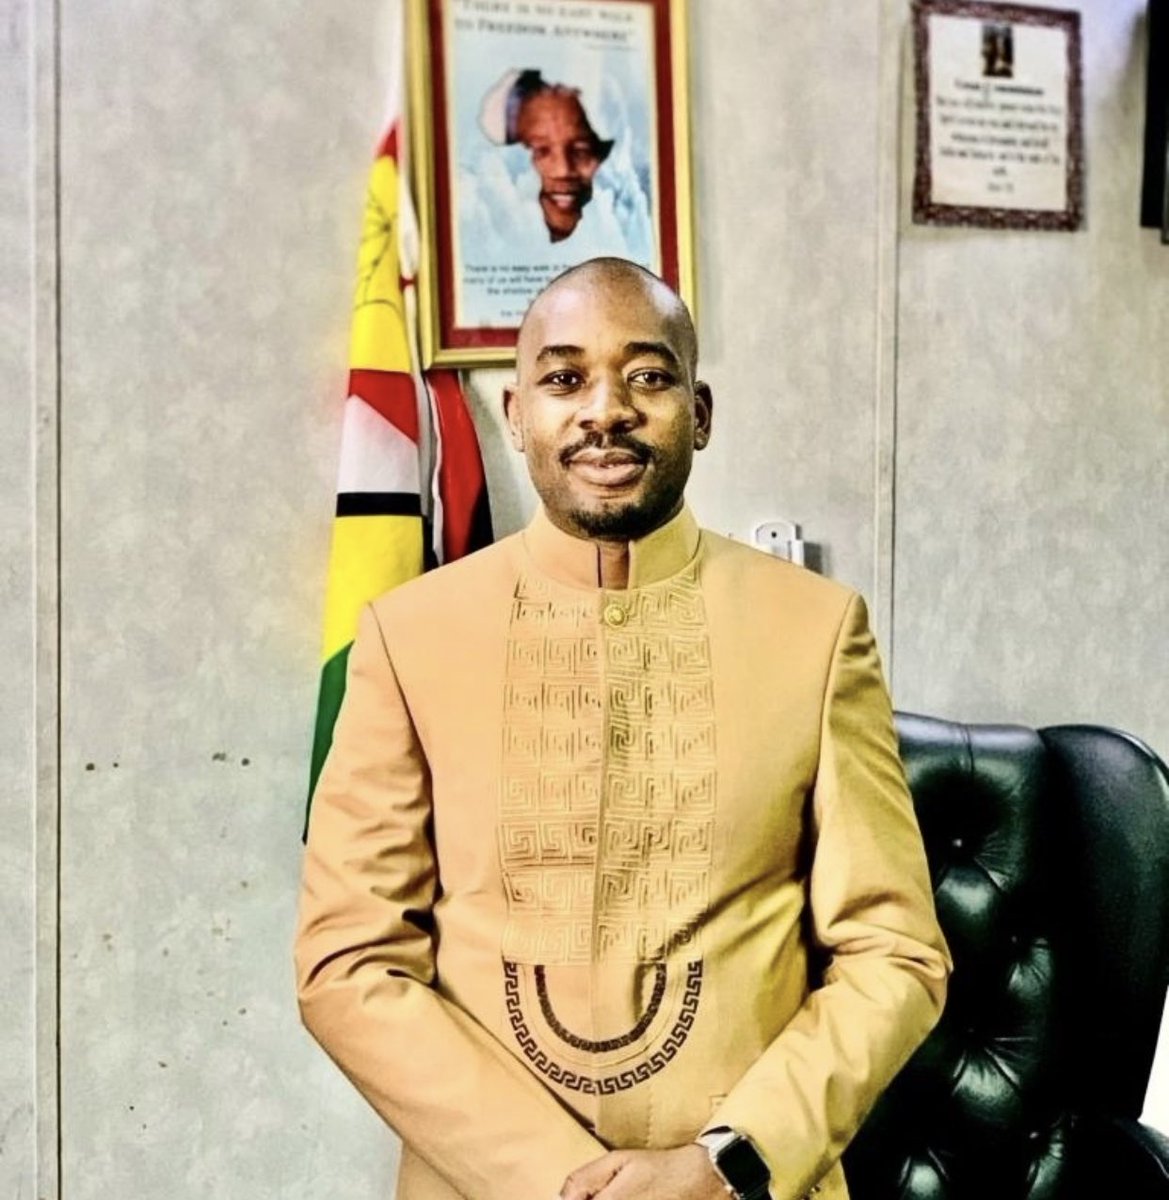 Meet @nelsonchamisa the President of Citizen Coalition for Change CCC RETWEET